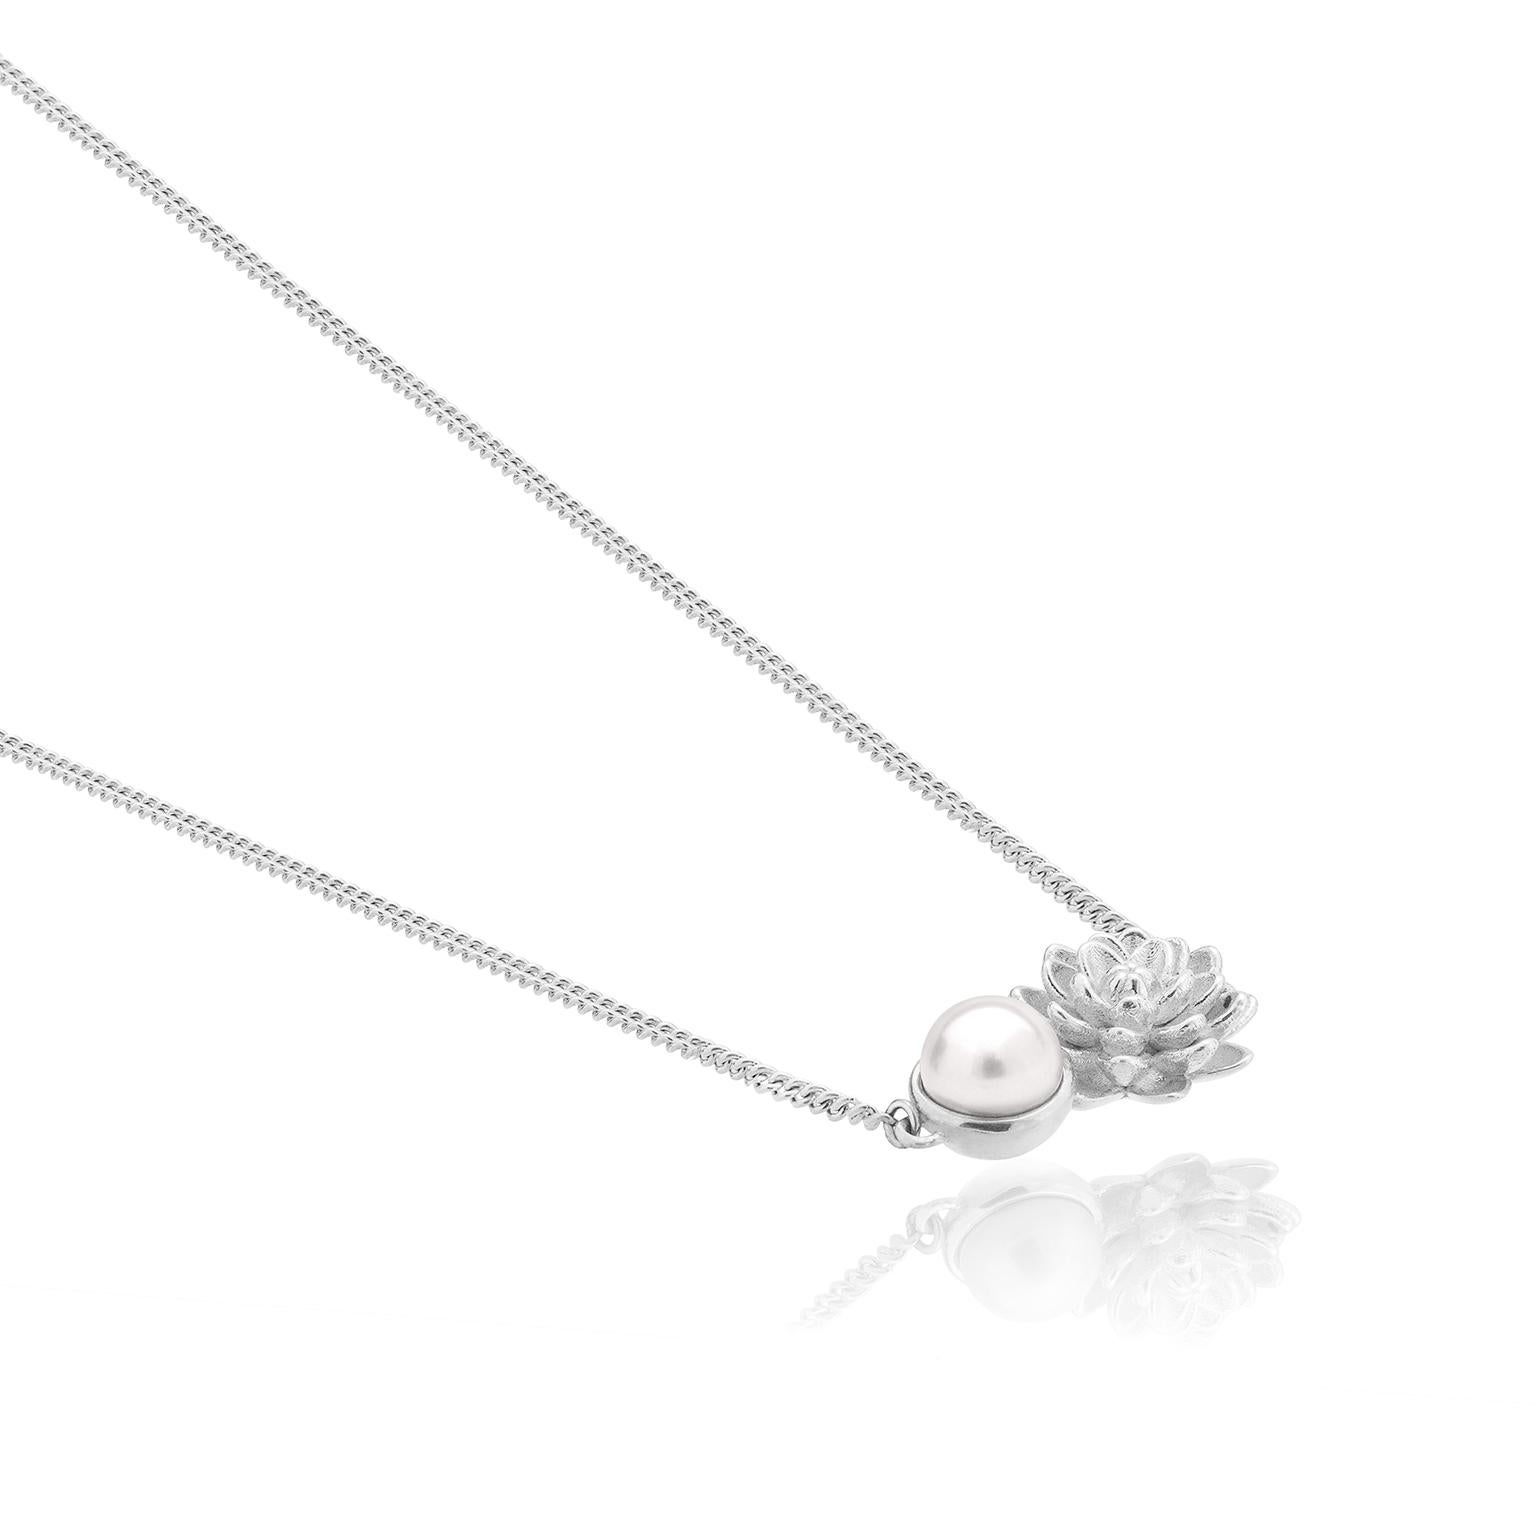 Inspired by the Dahlia, Mexico's beautiful national flower,this charm is handmade in .925 silver and includes a white pearl.Inspired by the Dahlia, Mexico’s beautiful national flower, this collection is presented in full Bloom with all the crowned